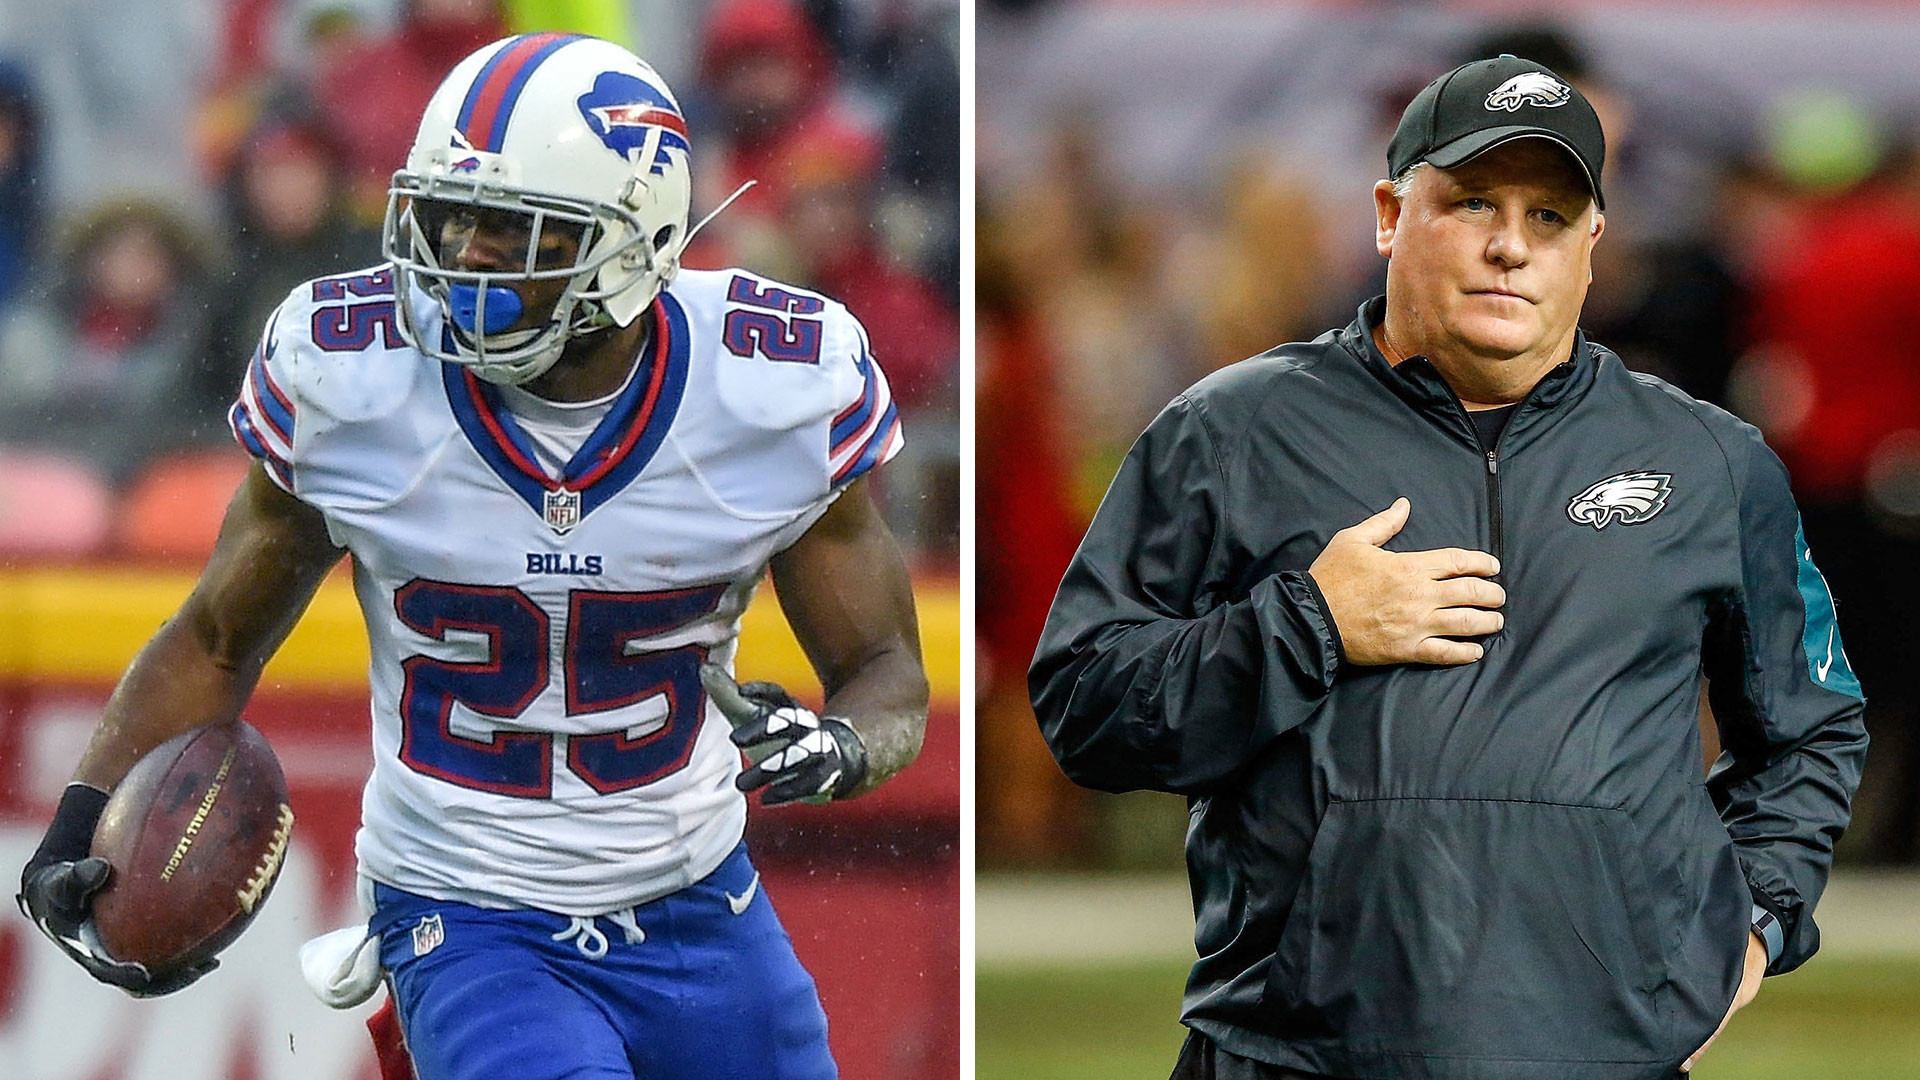 1920x1080 LeSean McCoy and Chip Kelly not enemies, but far from best friends | NFL |  Sporting News